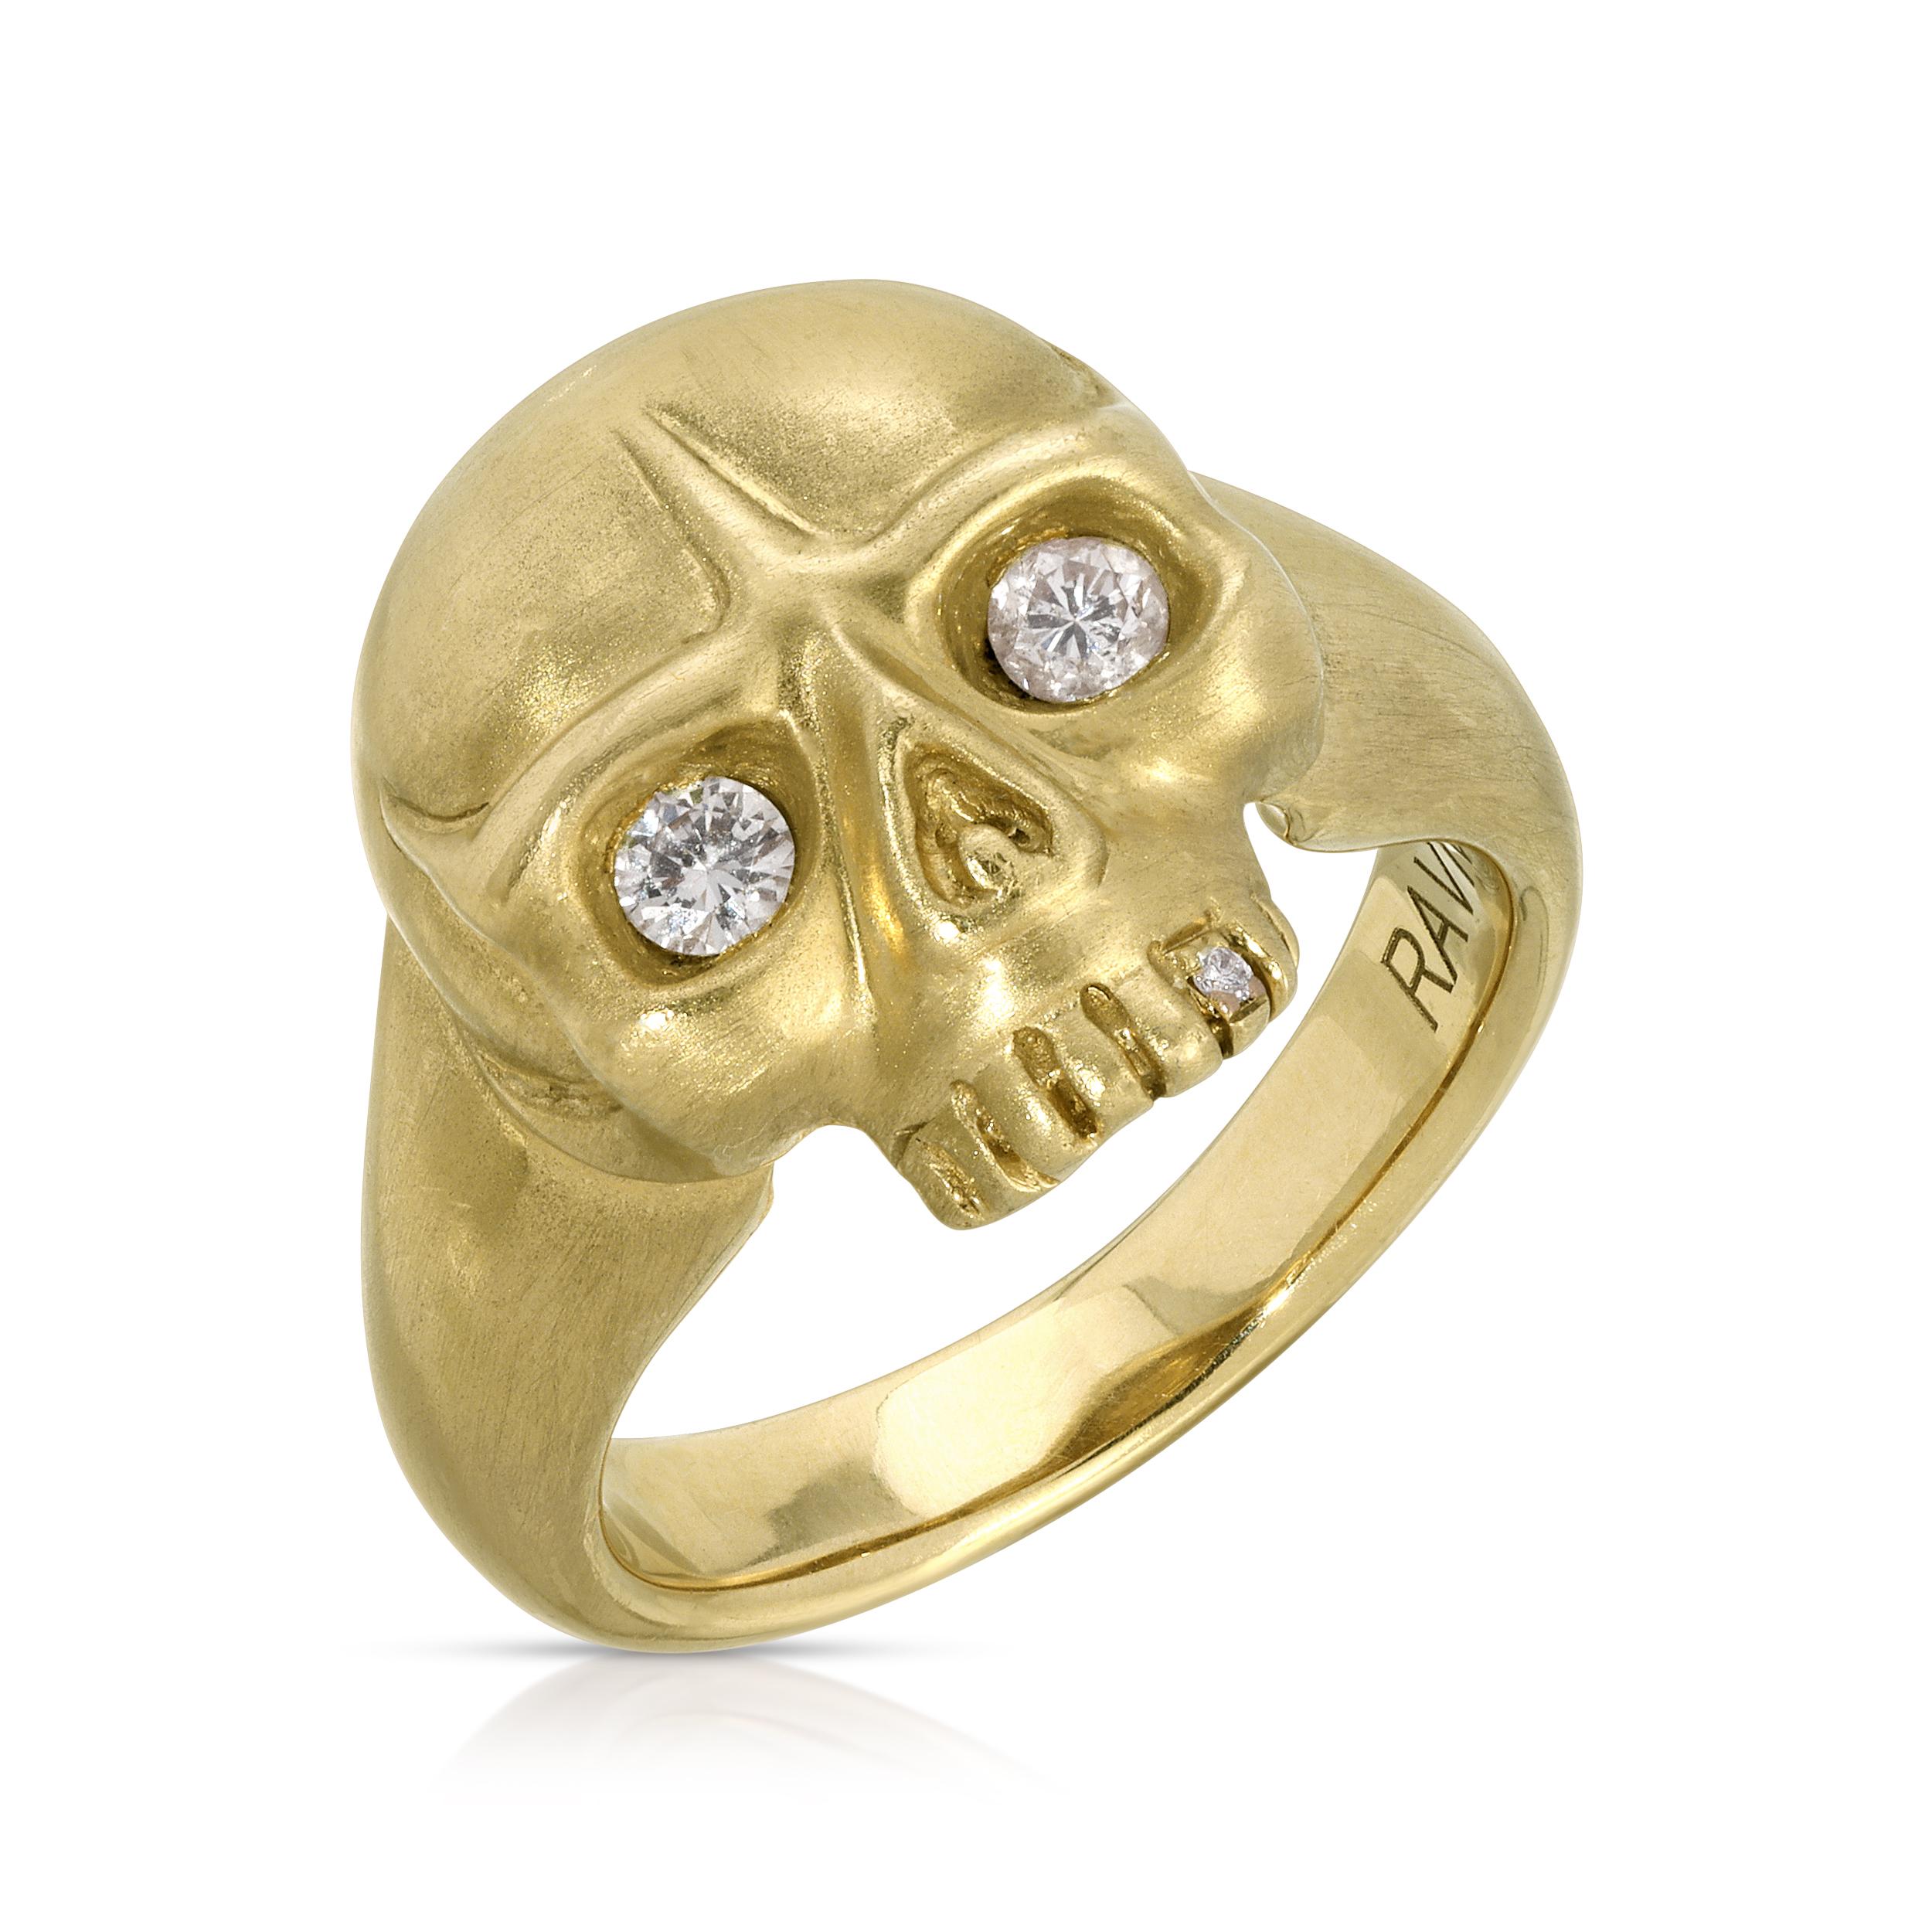 14k yellow gold, hand carved, skull ring, with diamond eyes.

The House of RAVN hand carved petite jawless skull ring. 14k yellow gold, weighing 10 grams. Featuring diamond eyes, baguette diamond accent tooth and a hidden diamond inside the band.